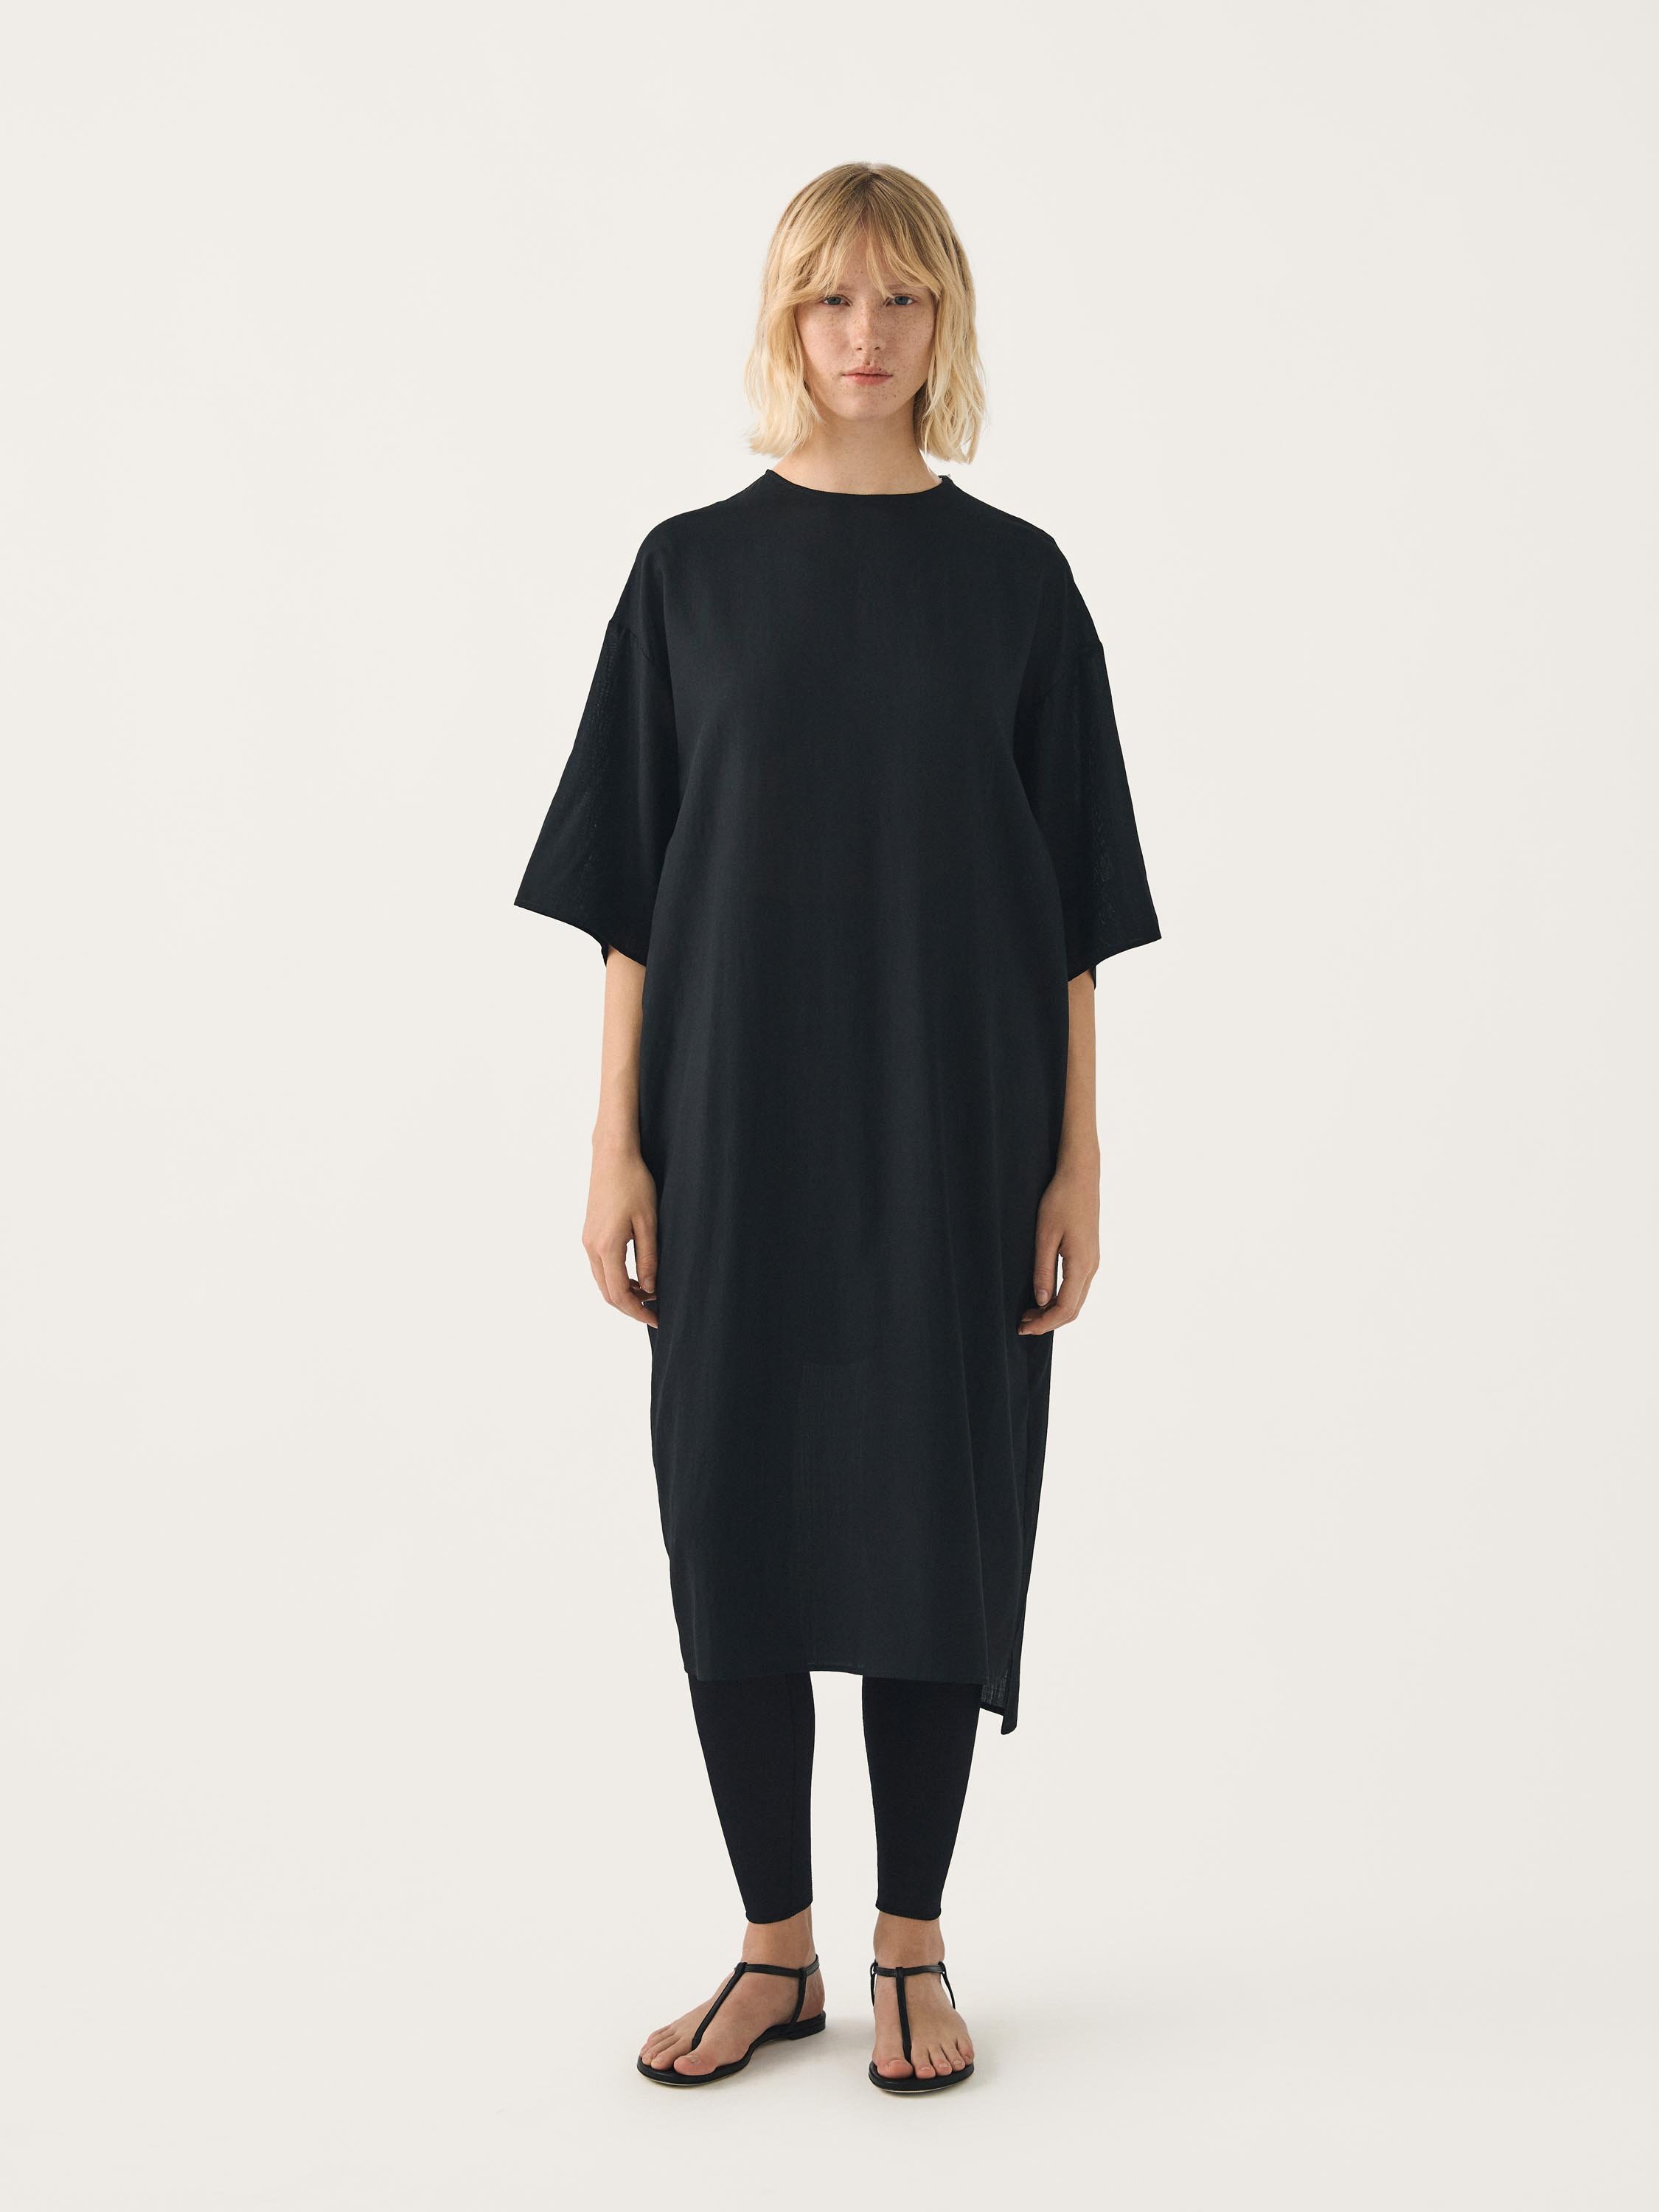 KEON woven t-shirt dress with elbow-length sleeves | FFORME